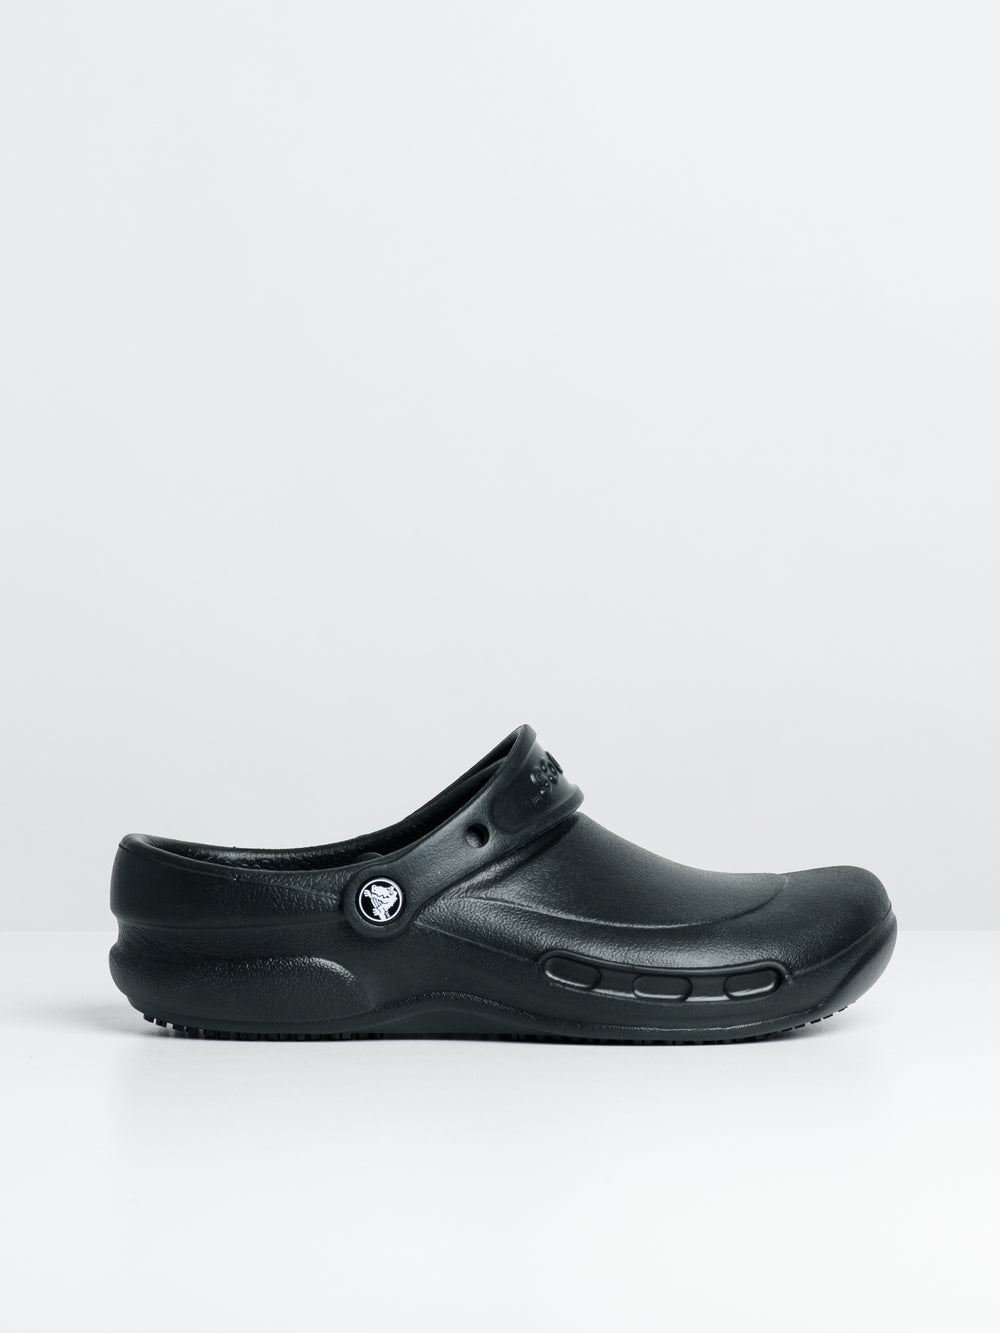 WOMENS CROCS BISTRO CLOGS - CLEARANCE